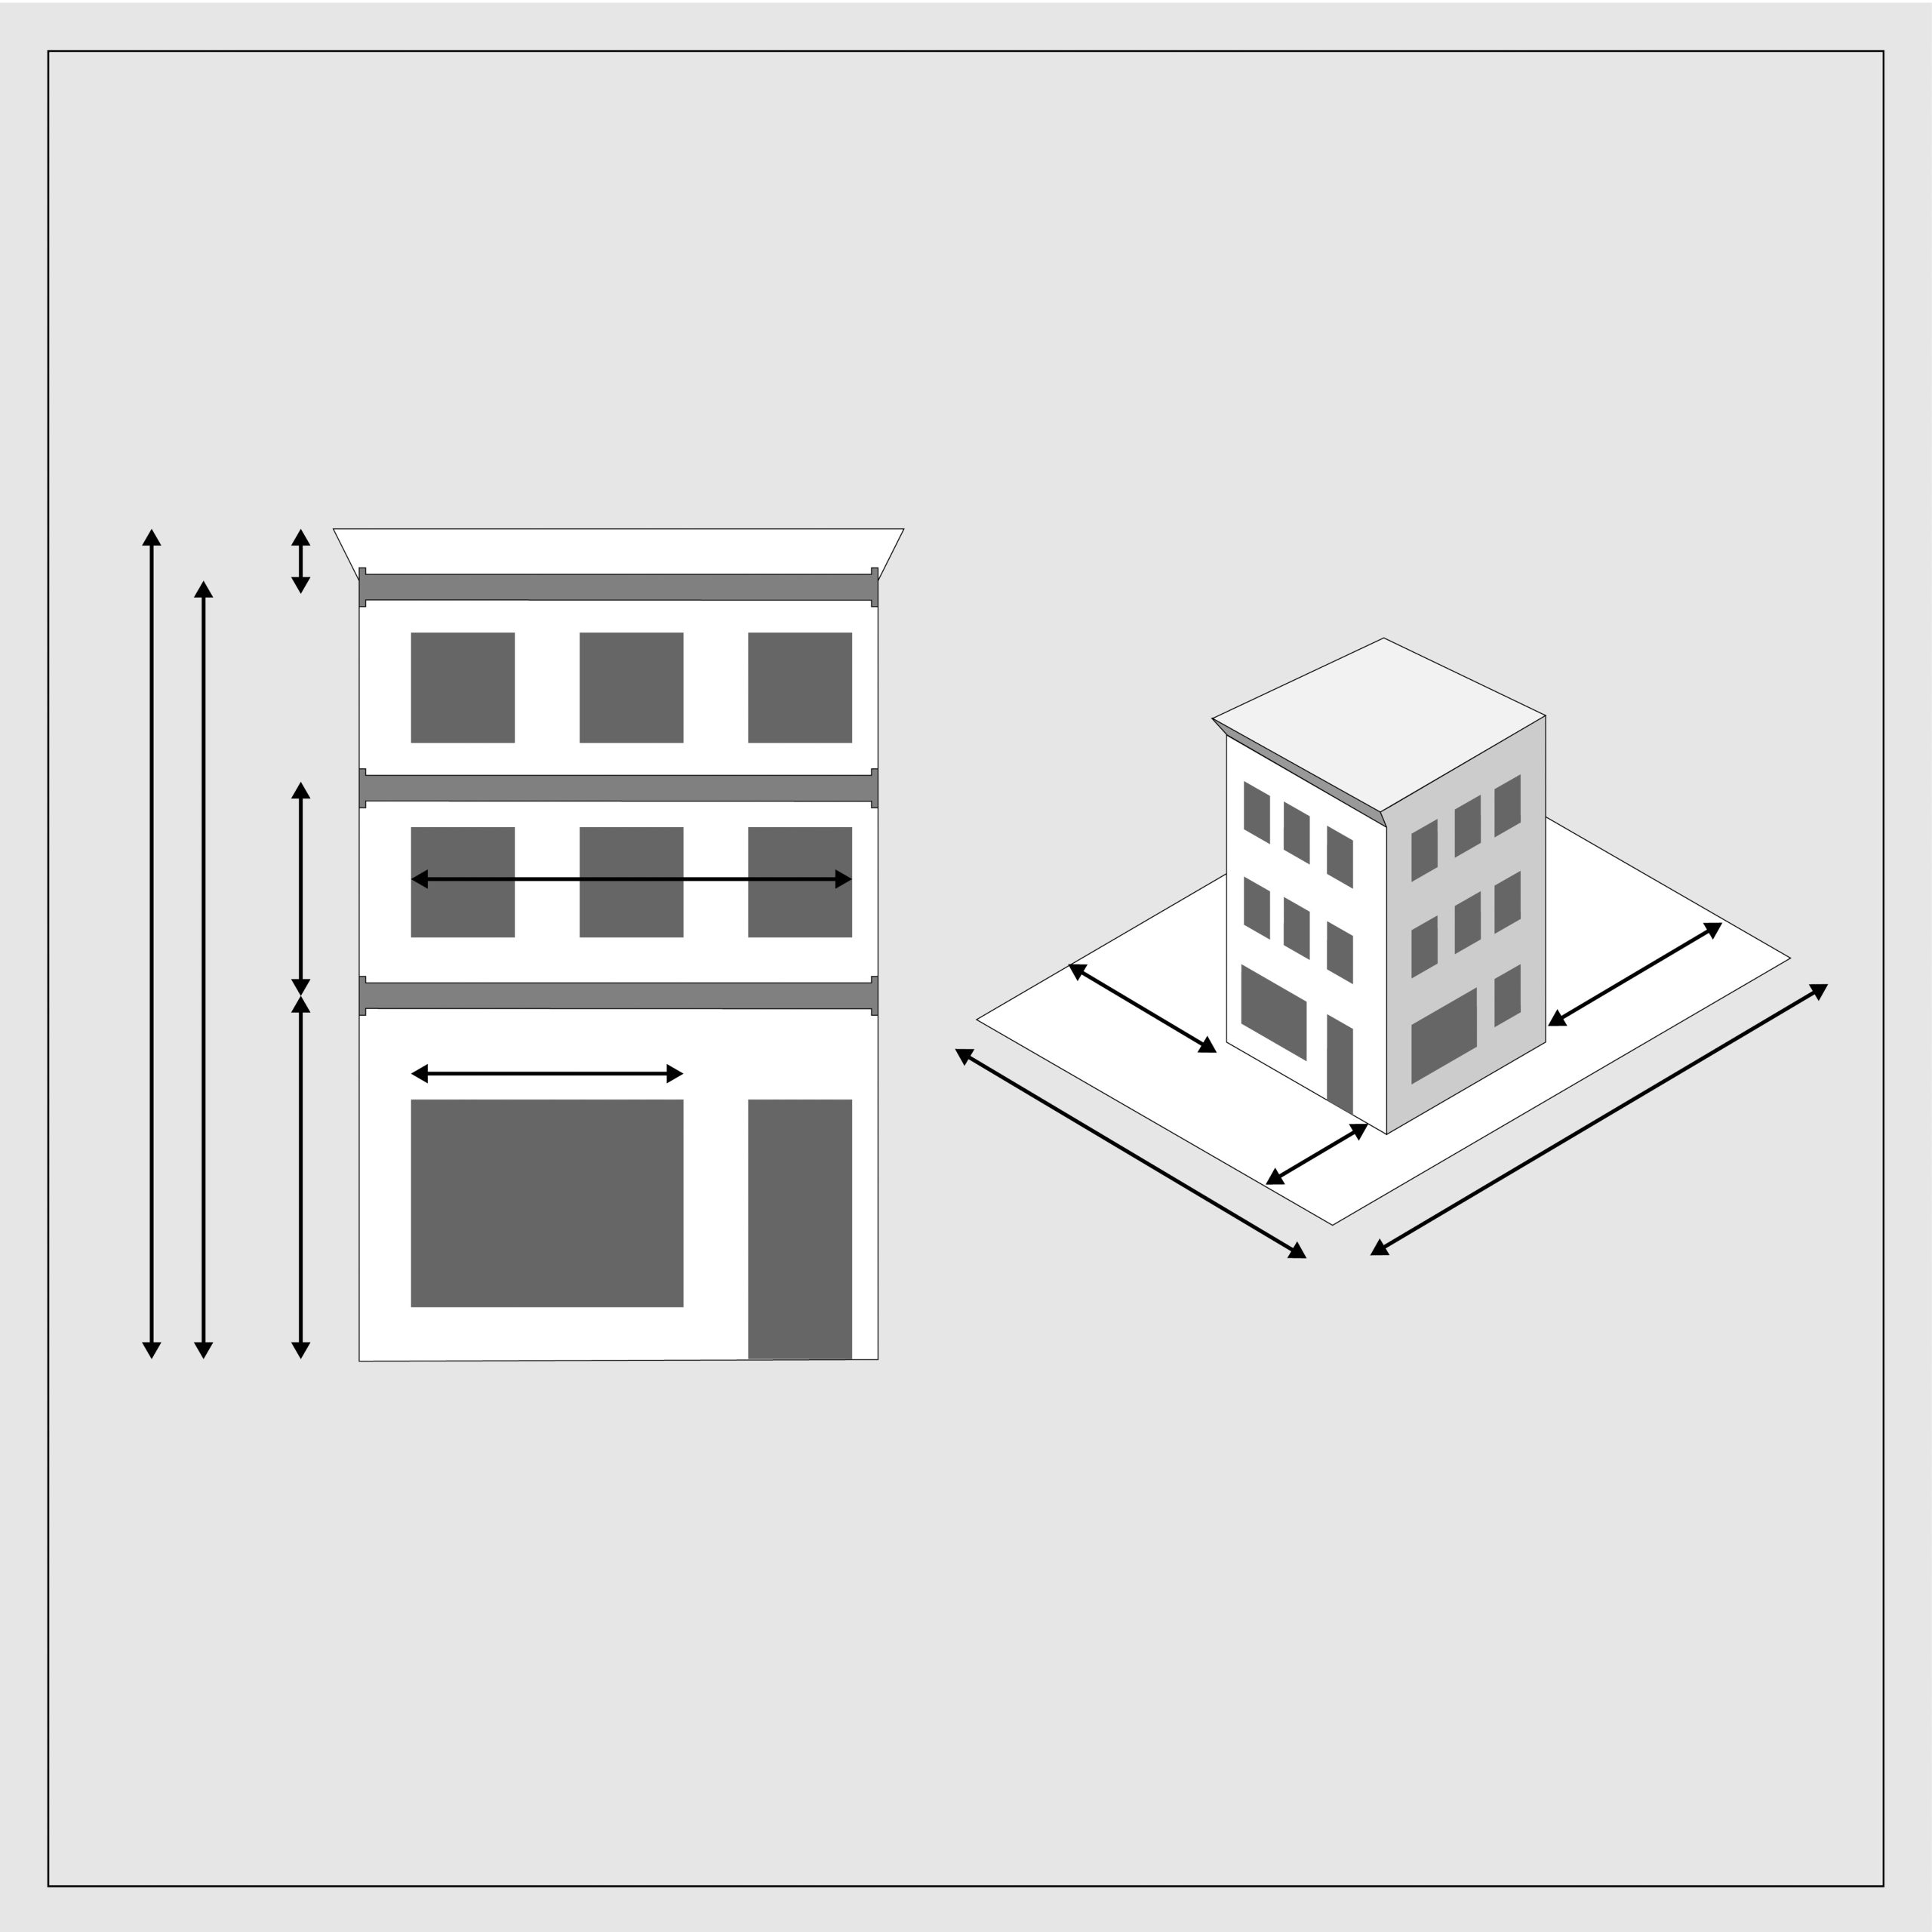 A grayscale diagram of a three-story, mixed-use, traditionally styled building with three columns of windows and a cornice. On the left is a diagram of the front facade, on the right is an axonometric diagram of the building on its land parcel. There are unlabeled arrows implying measurements for total height, total living area height, ground floor height, upper floor heights, cornice heights, ground and upper floor fenestration, setbacks, land widths, parcel depths, etc.